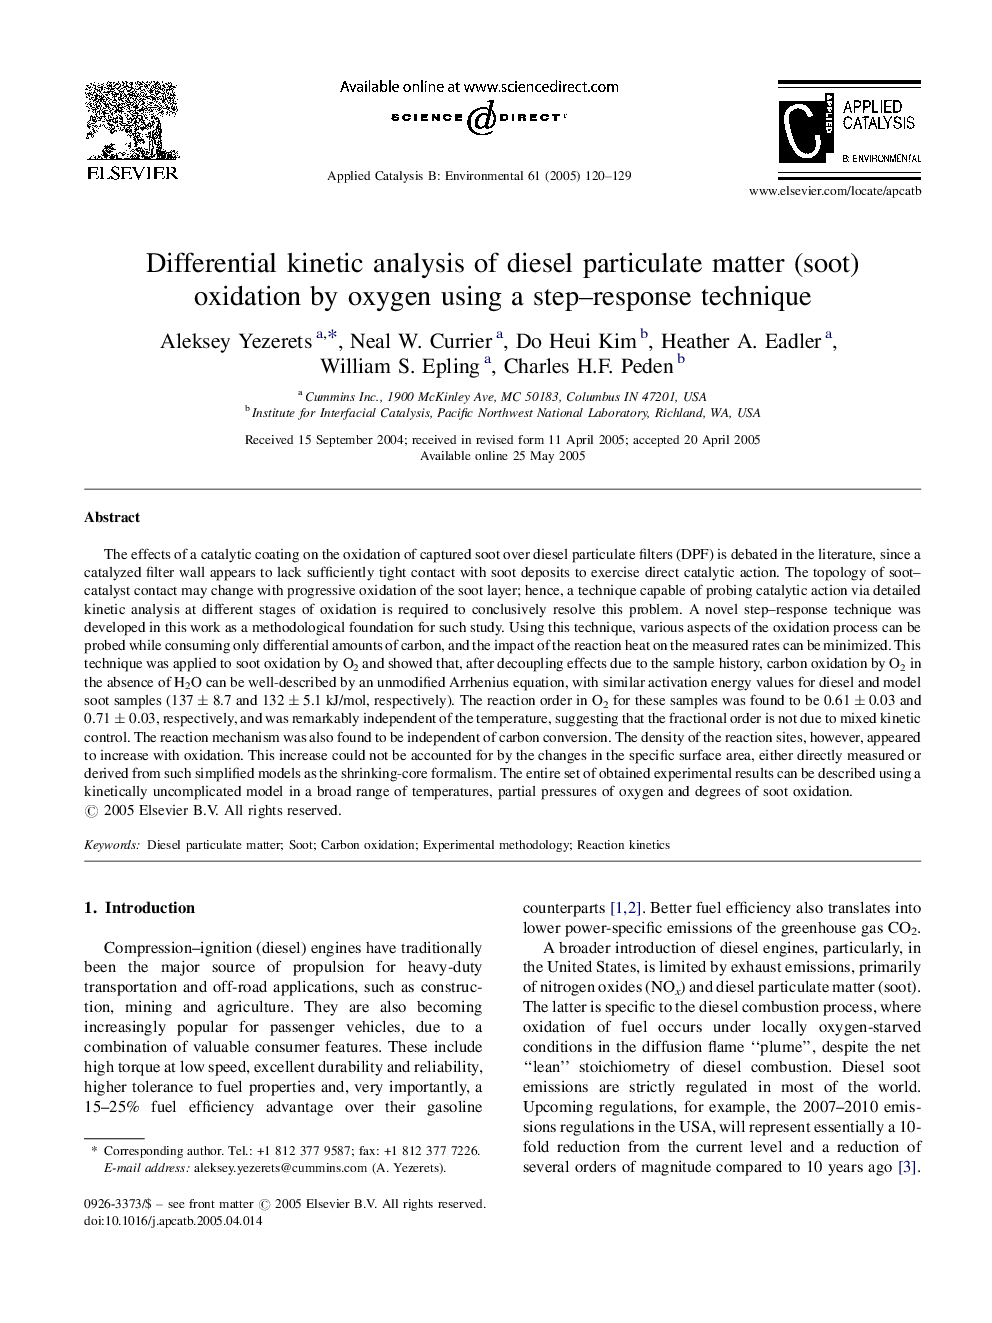 Differential kinetic analysis of diesel particulate matter (soot) oxidation by oxygen using a step-response technique